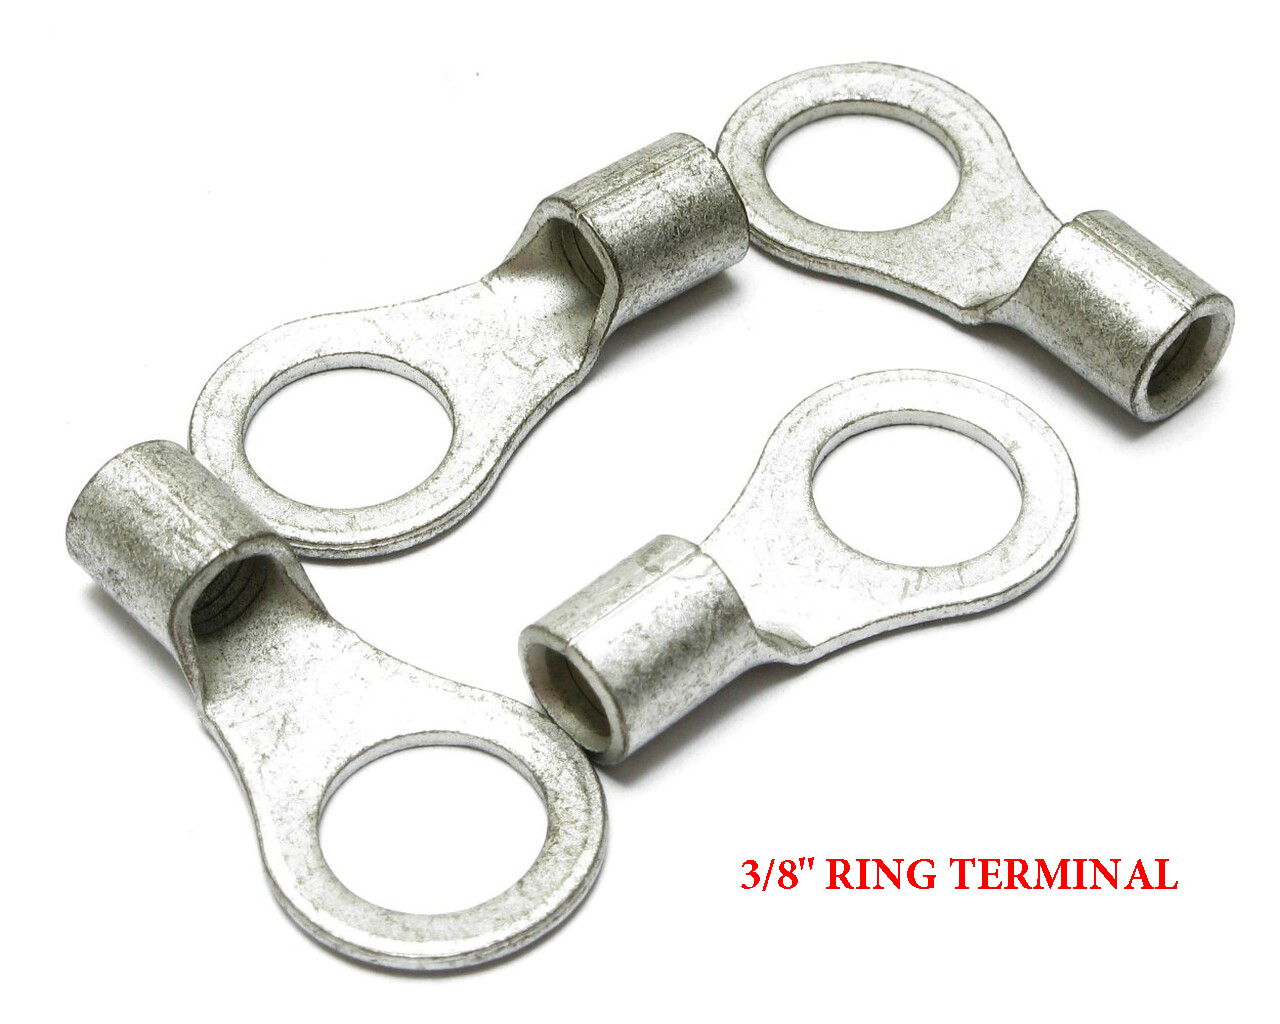 Probots Copper Ring Type Insulated Terminal 1.5mm-10mm Buy Online India